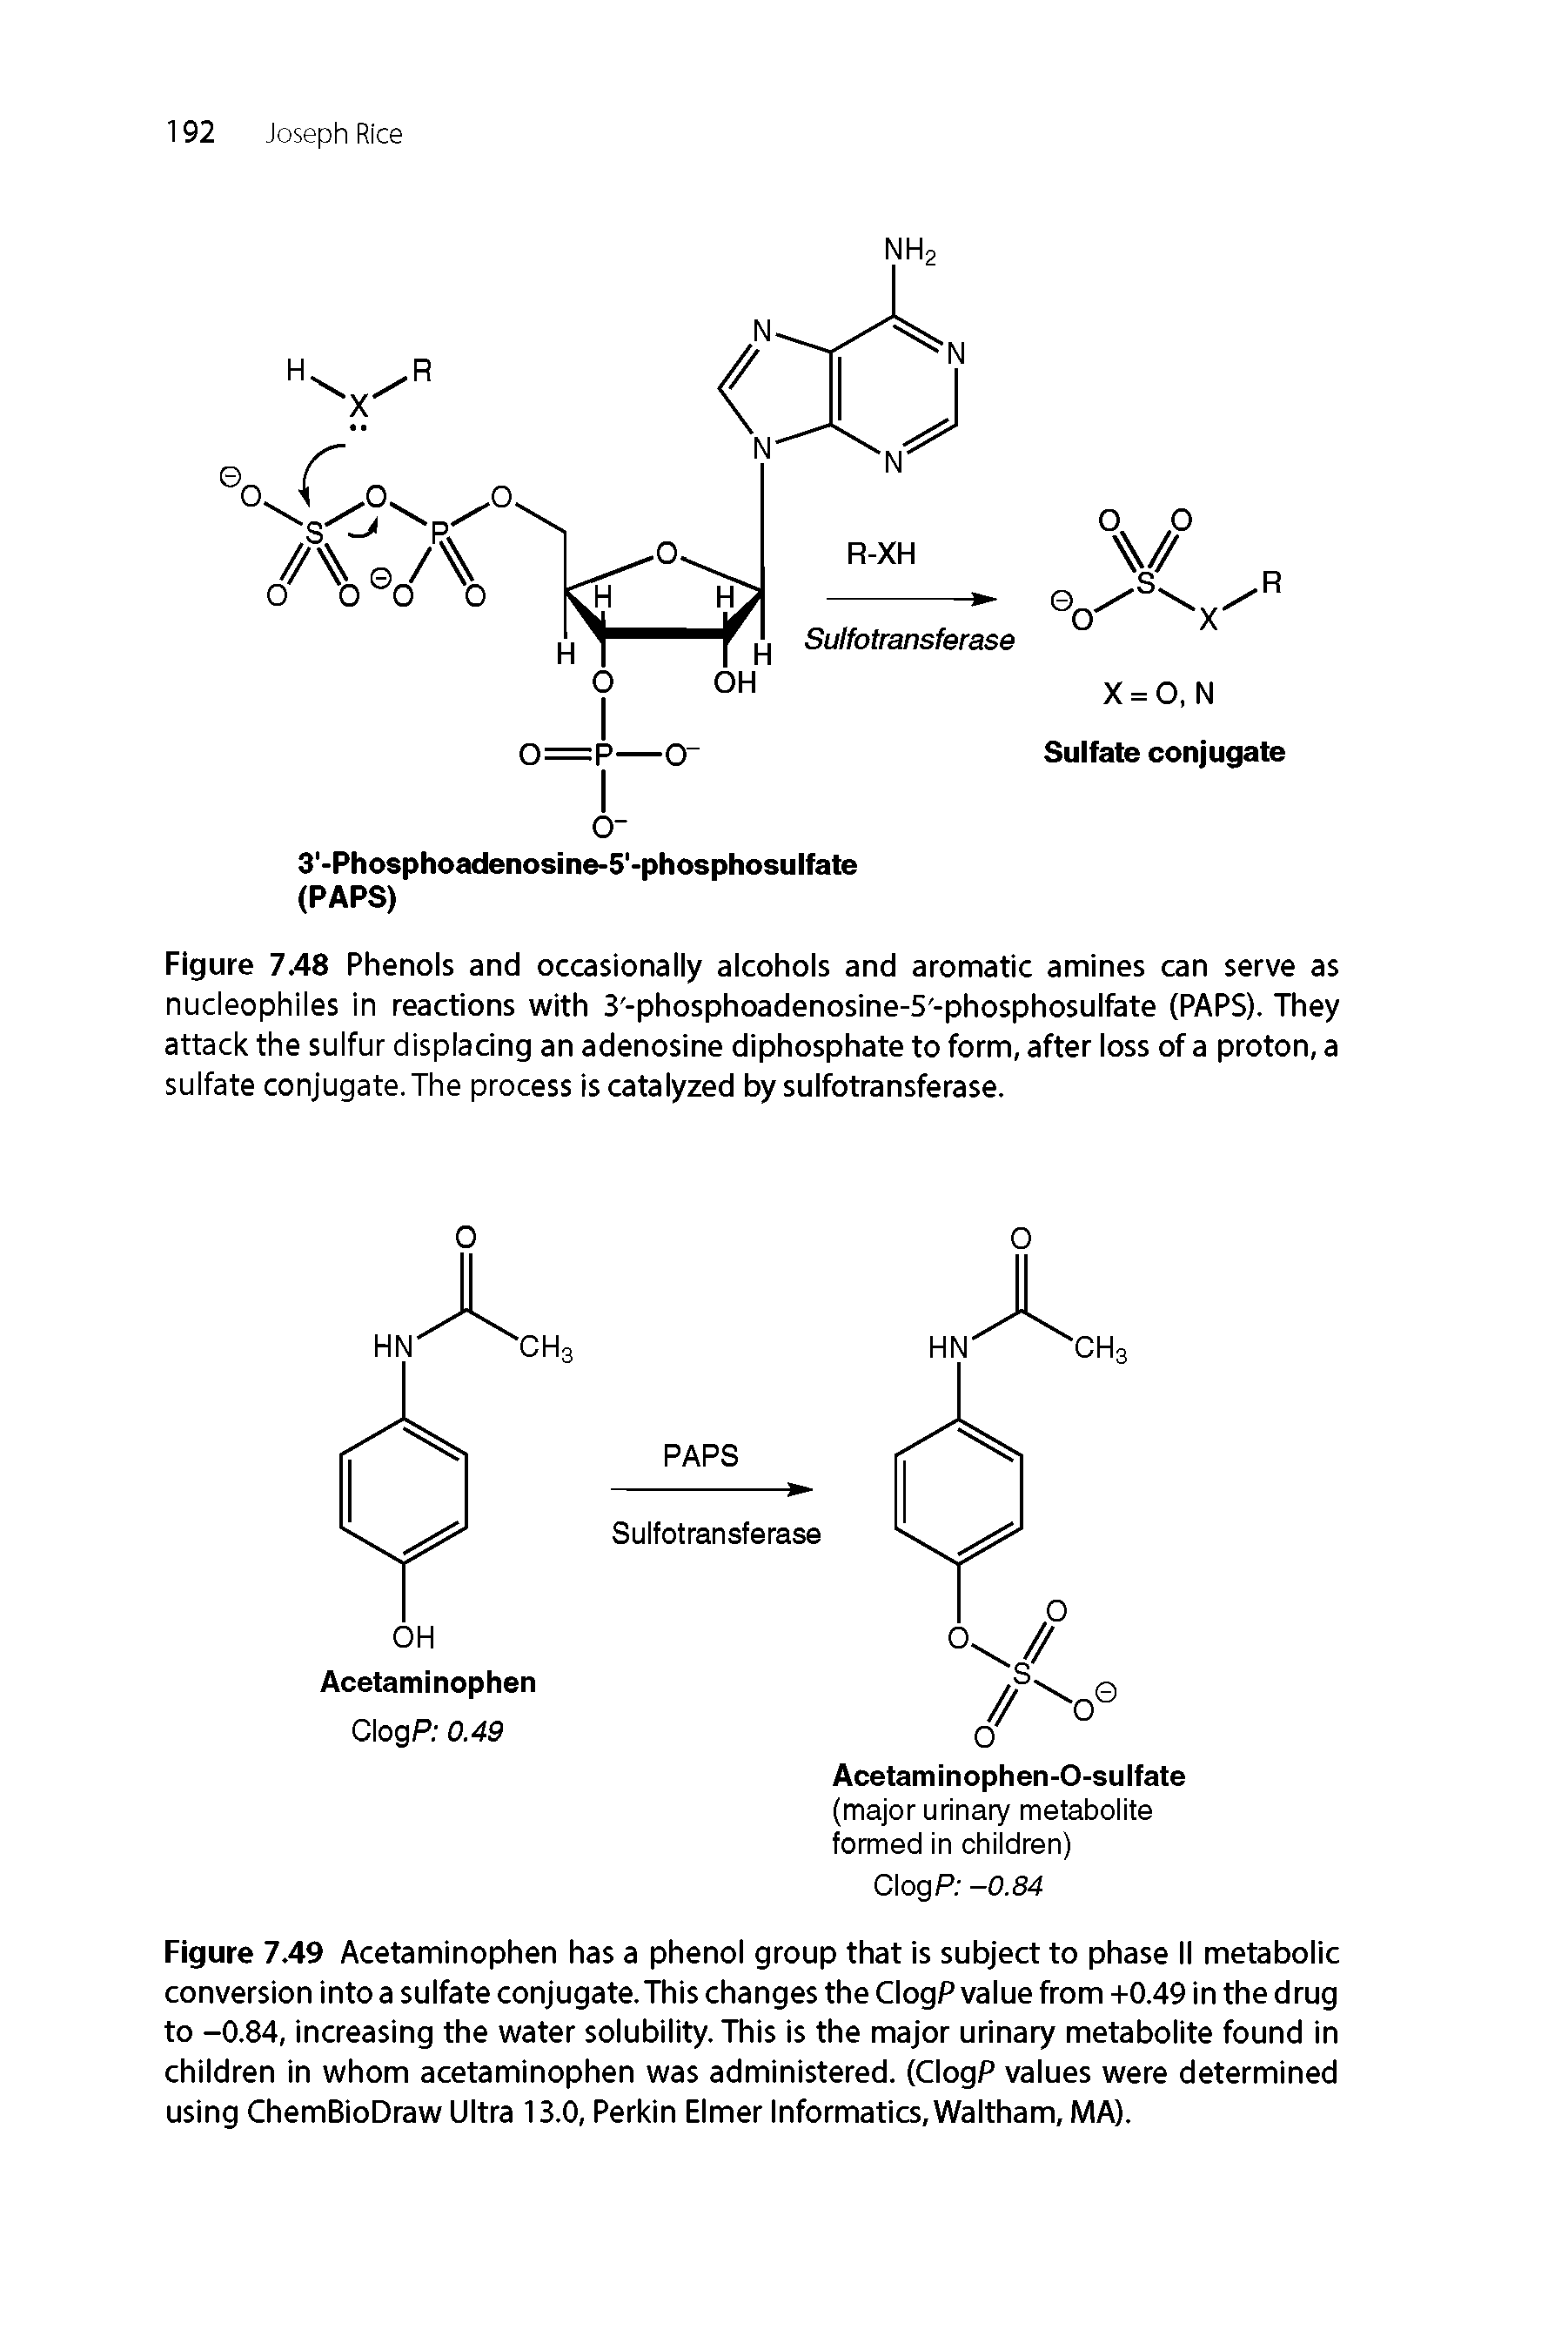 Figure 749 Acetaminophen has a phenol group that is subject to phase II metabolic conversion into a sulfate conjugate.This changes the ClogP value from +0.49 in the drug to -0.84, increasing the water solubility. This is the major urinary metabolite found in children in whom acetaminophen was administered. (ClogP values were determined using ChemBioDraw Ultra 13.0, Perkin Elmer Informatics, Waltham, MA).